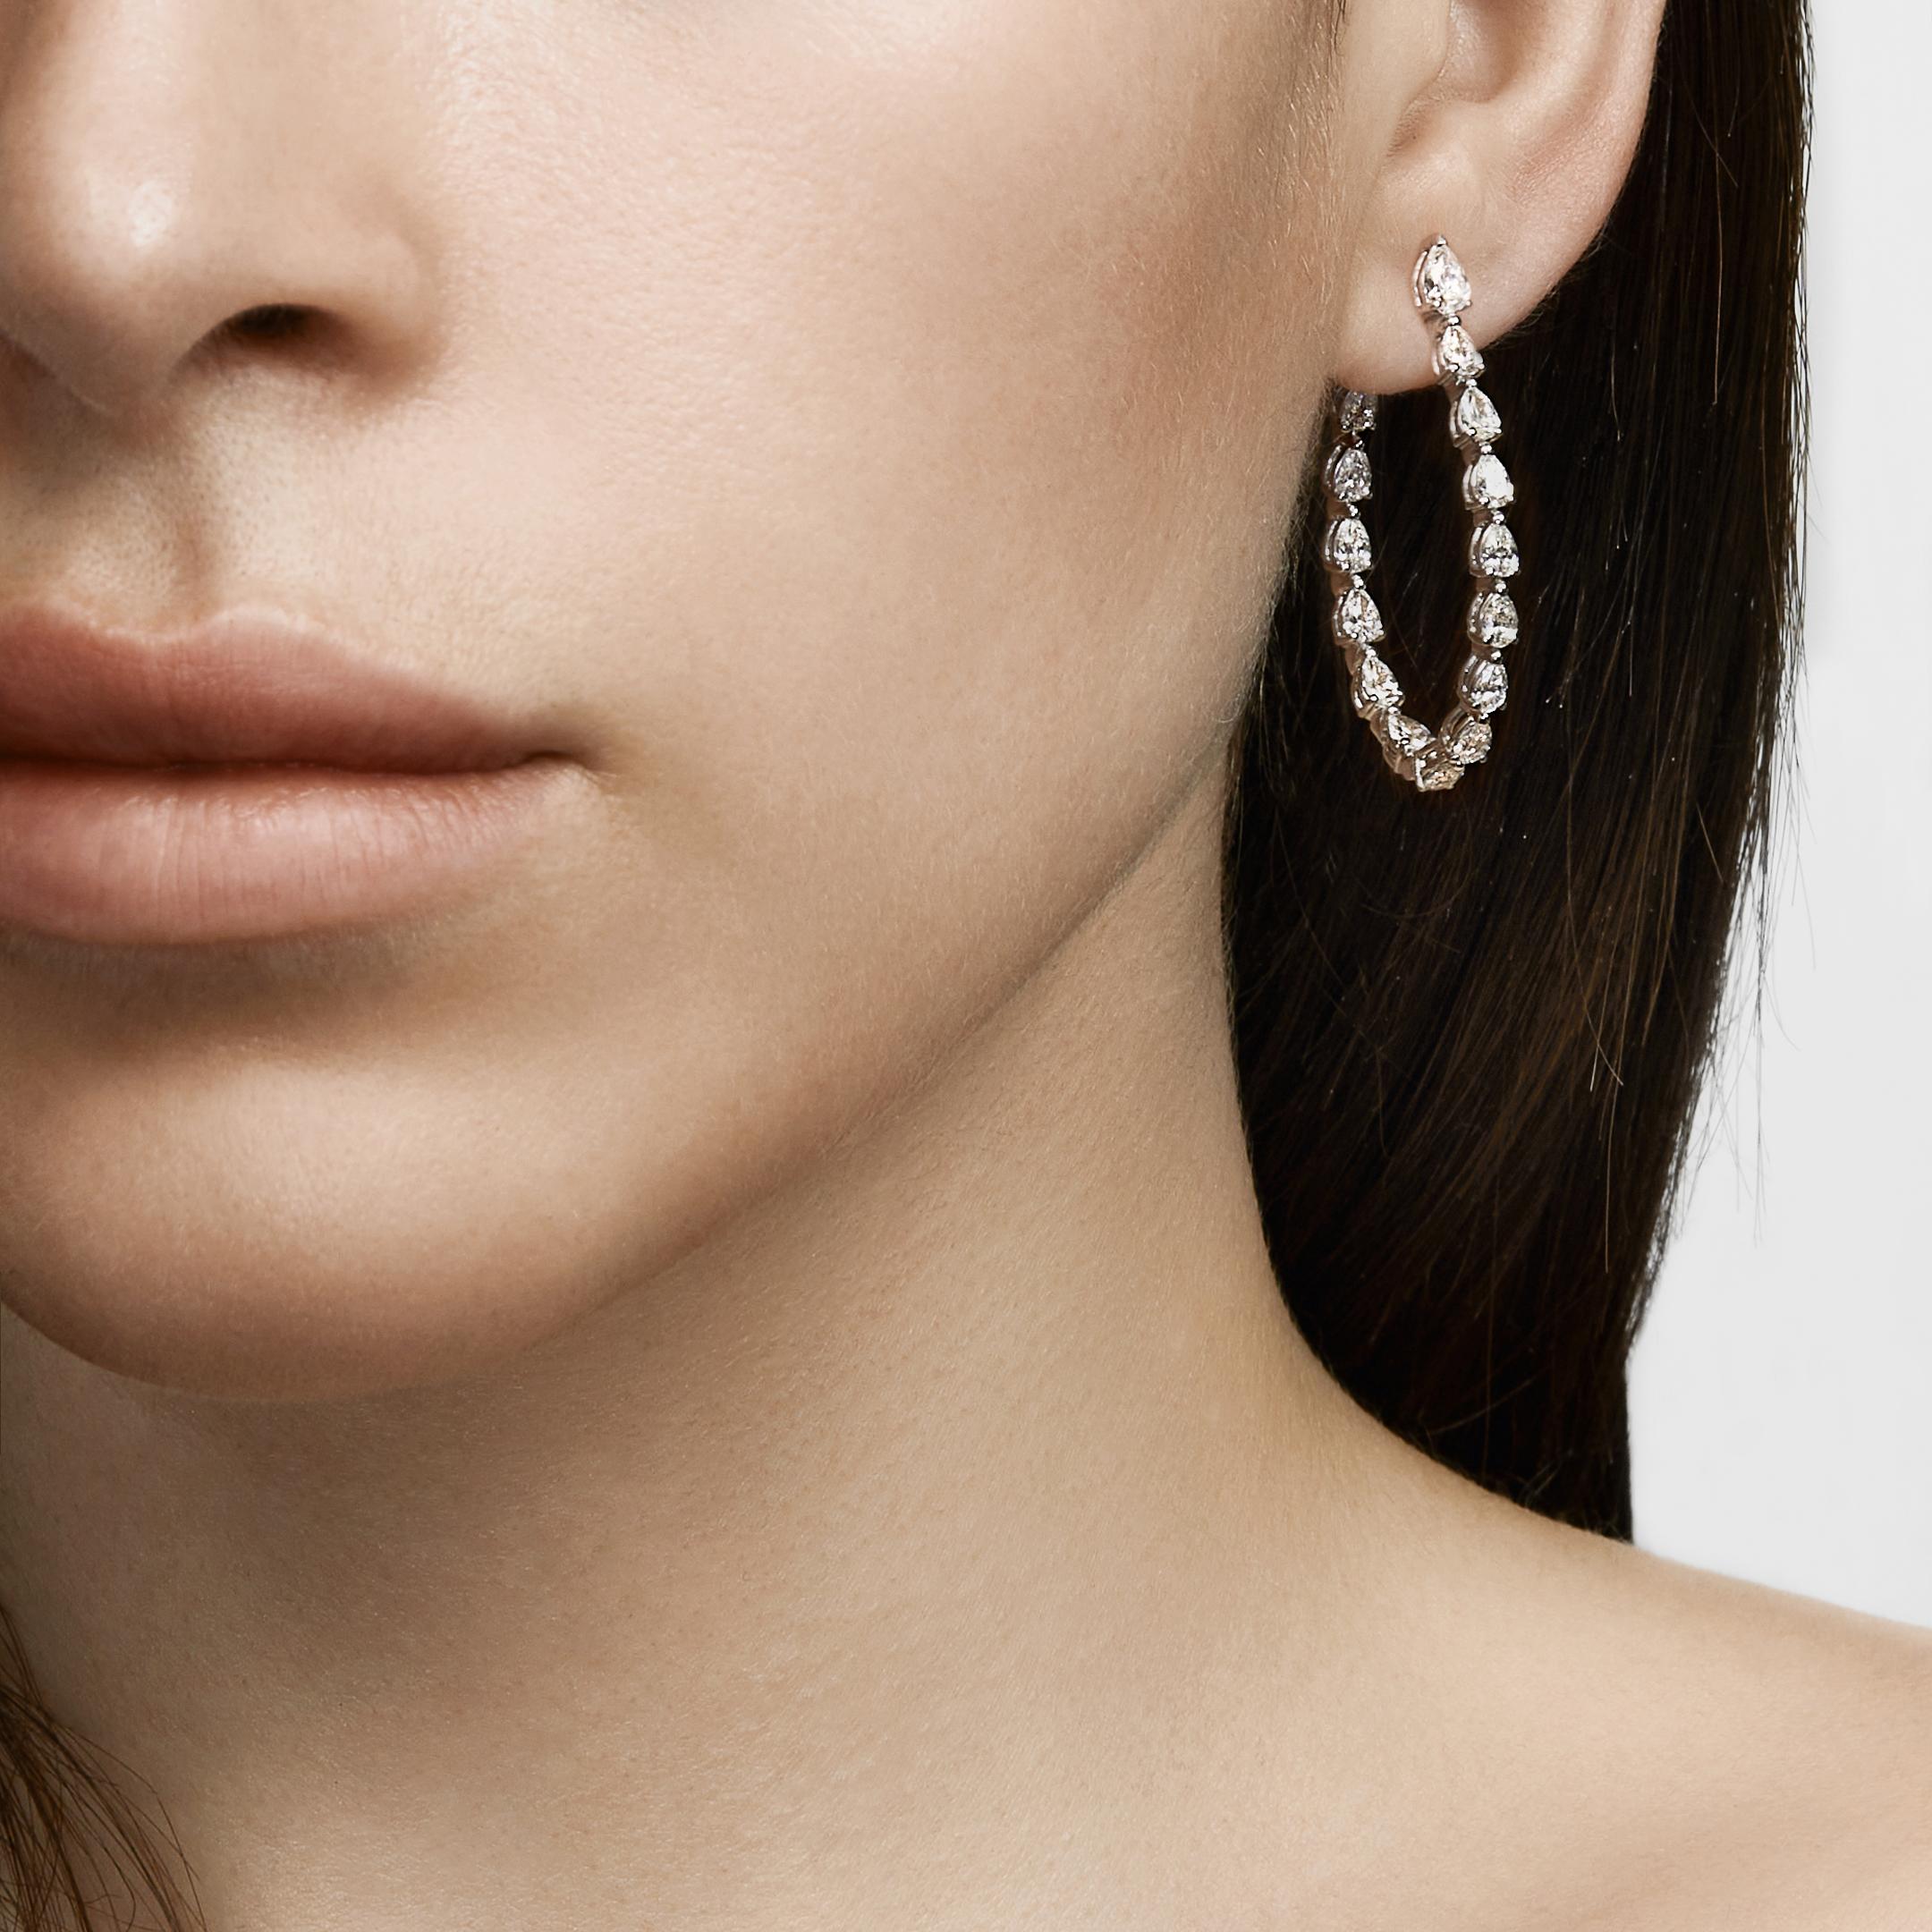 Elegant pear-shaped diamonds create an ultra-luxurious version of your go-to statement hoop earrings. The Pear-Shaped Diamond Hoop Earrings feature an “inside out” design with diamonds lining the inner edge that ensures you see twice the amount of